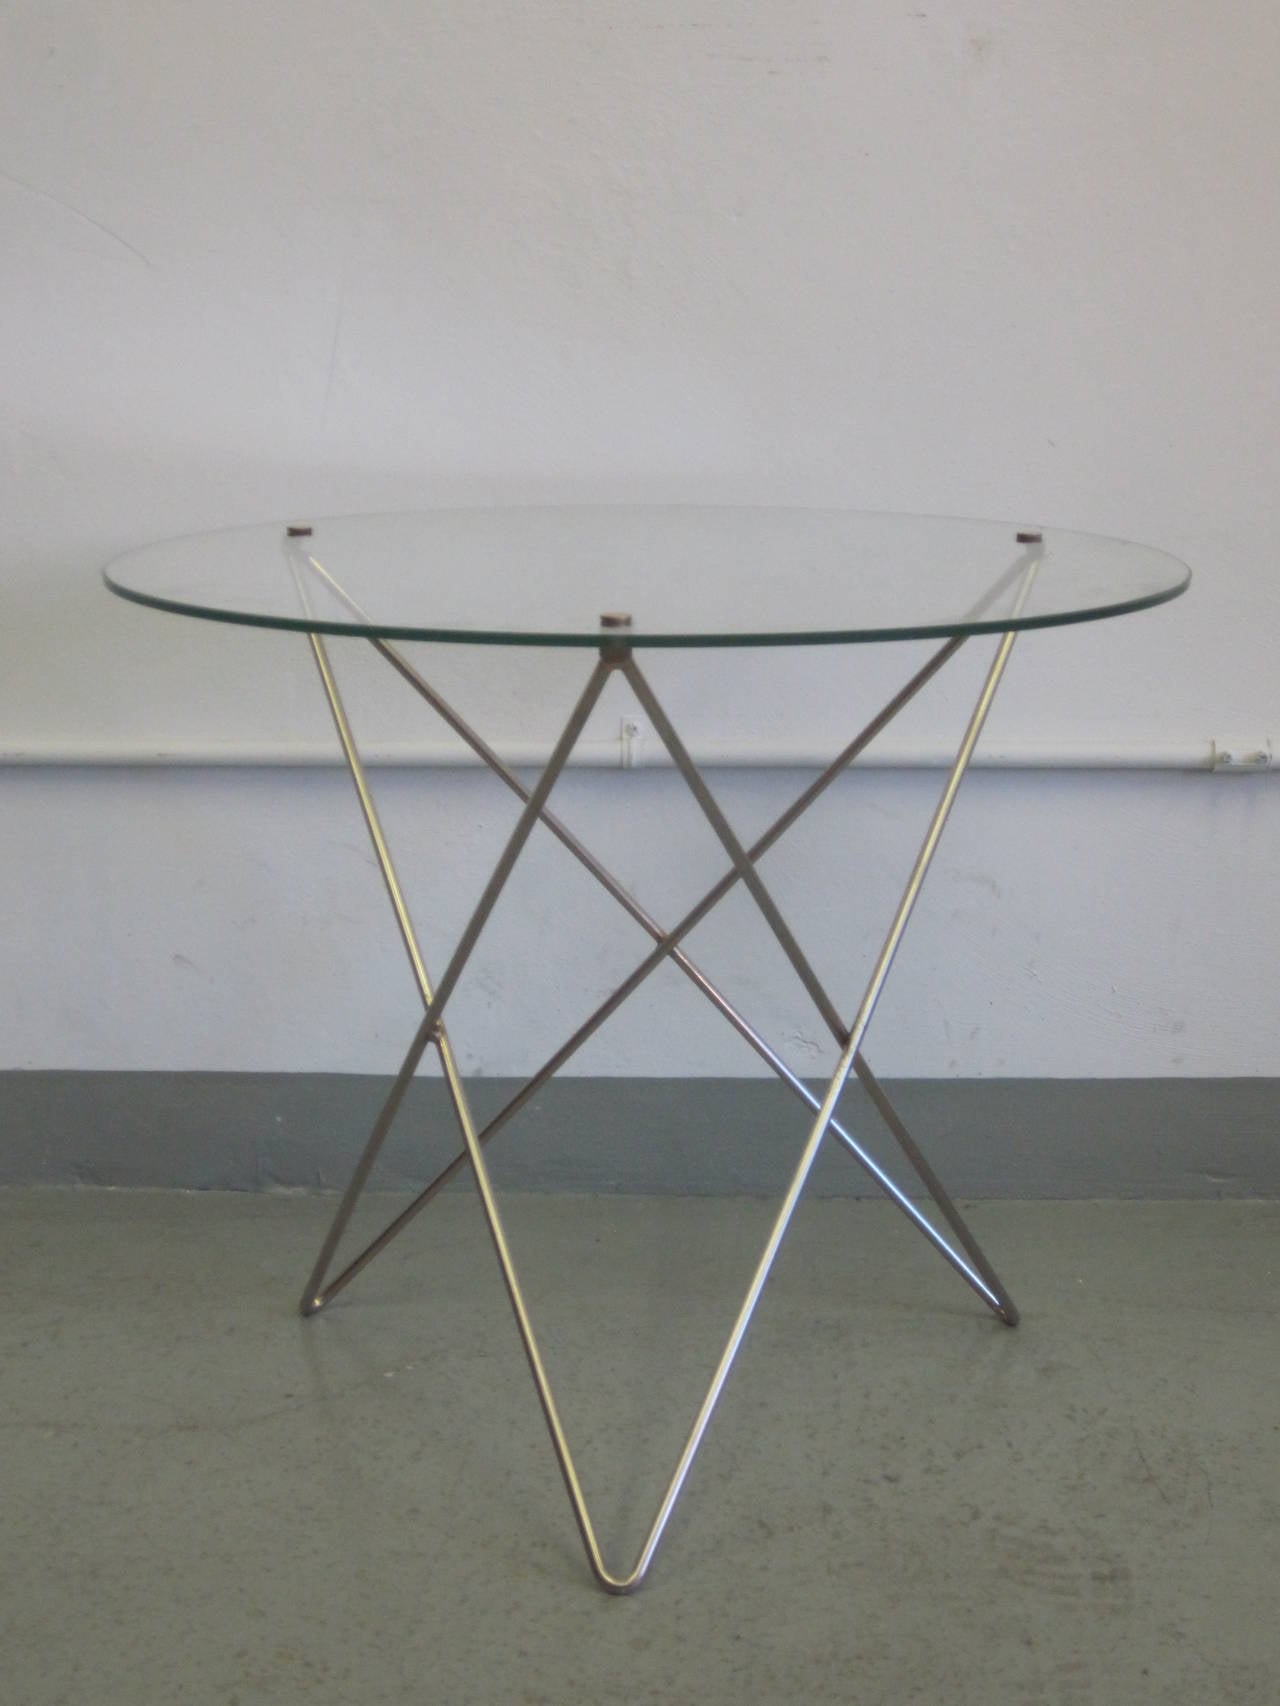 Mid-Century Modern Italian Midcentury Stainless Steel and Glass Side Tables, Carlo Paccagnini, Pair For Sale